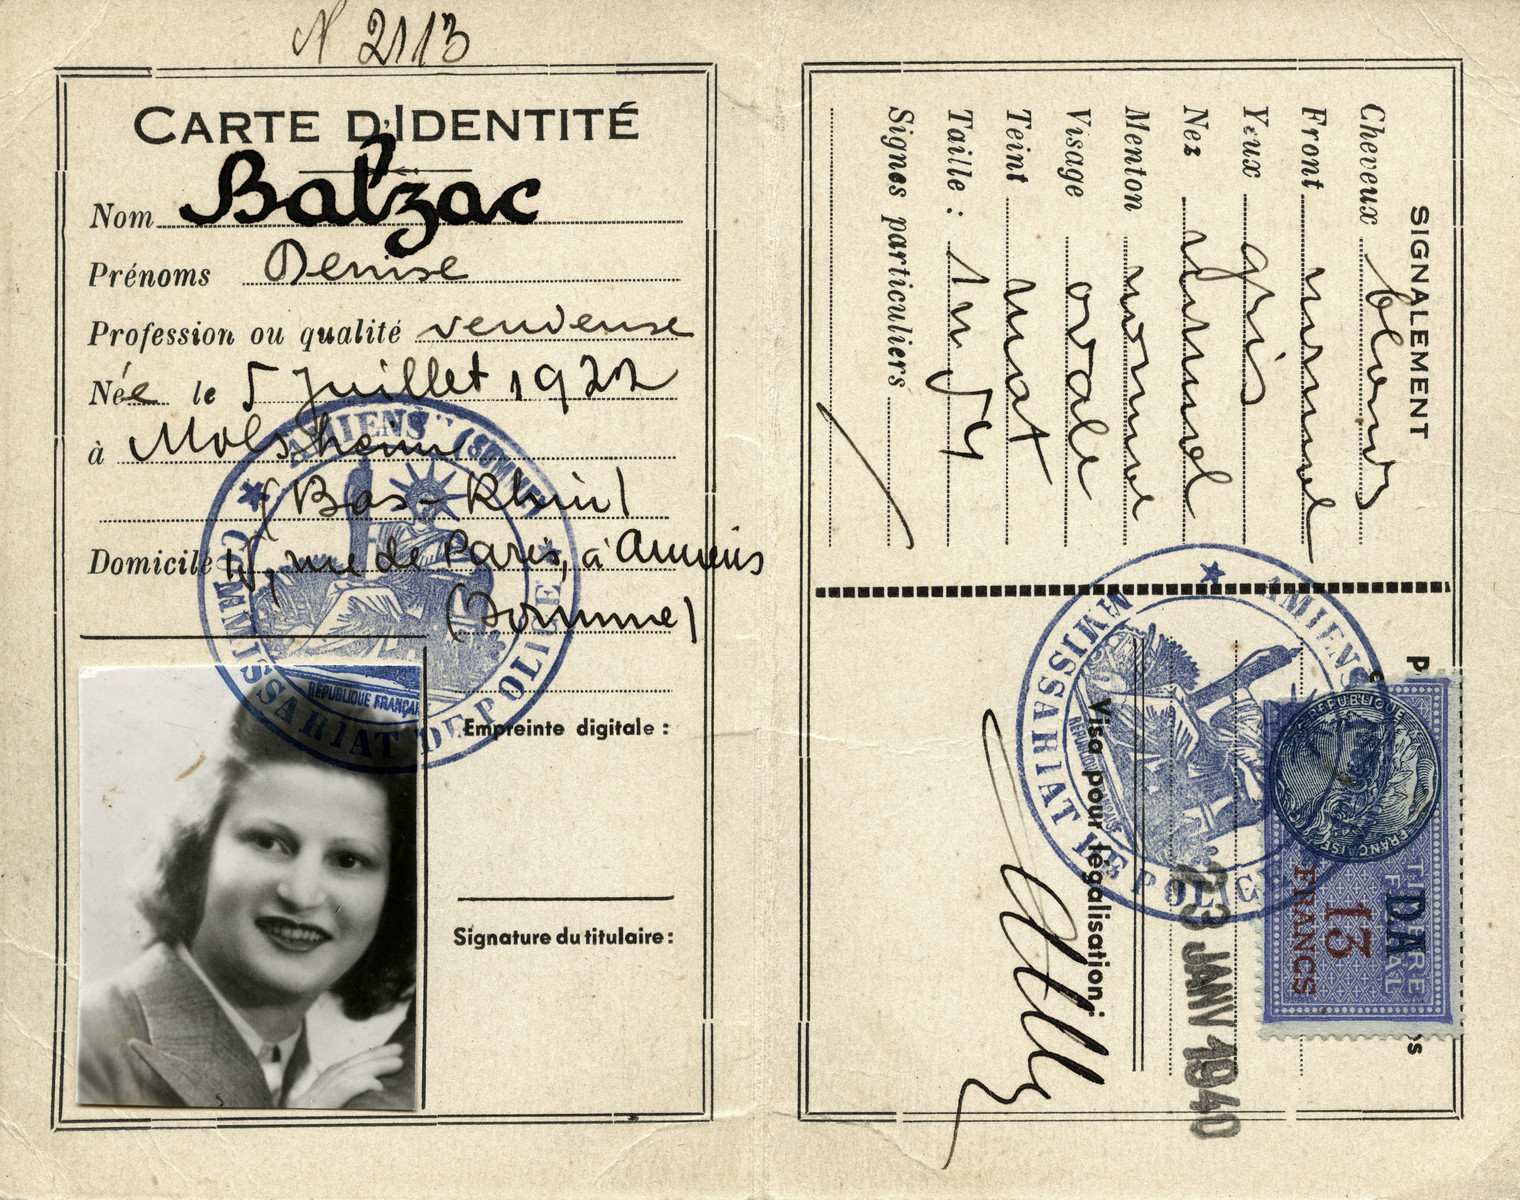 False papers given to Dora Licht under the pseudonym of Denise Balzac.

[The January 1940 date is clearly false as well since Germany only invaded France in May 1940, so at the time this card was supposedly issued, Dora Licht was still using her true name.]